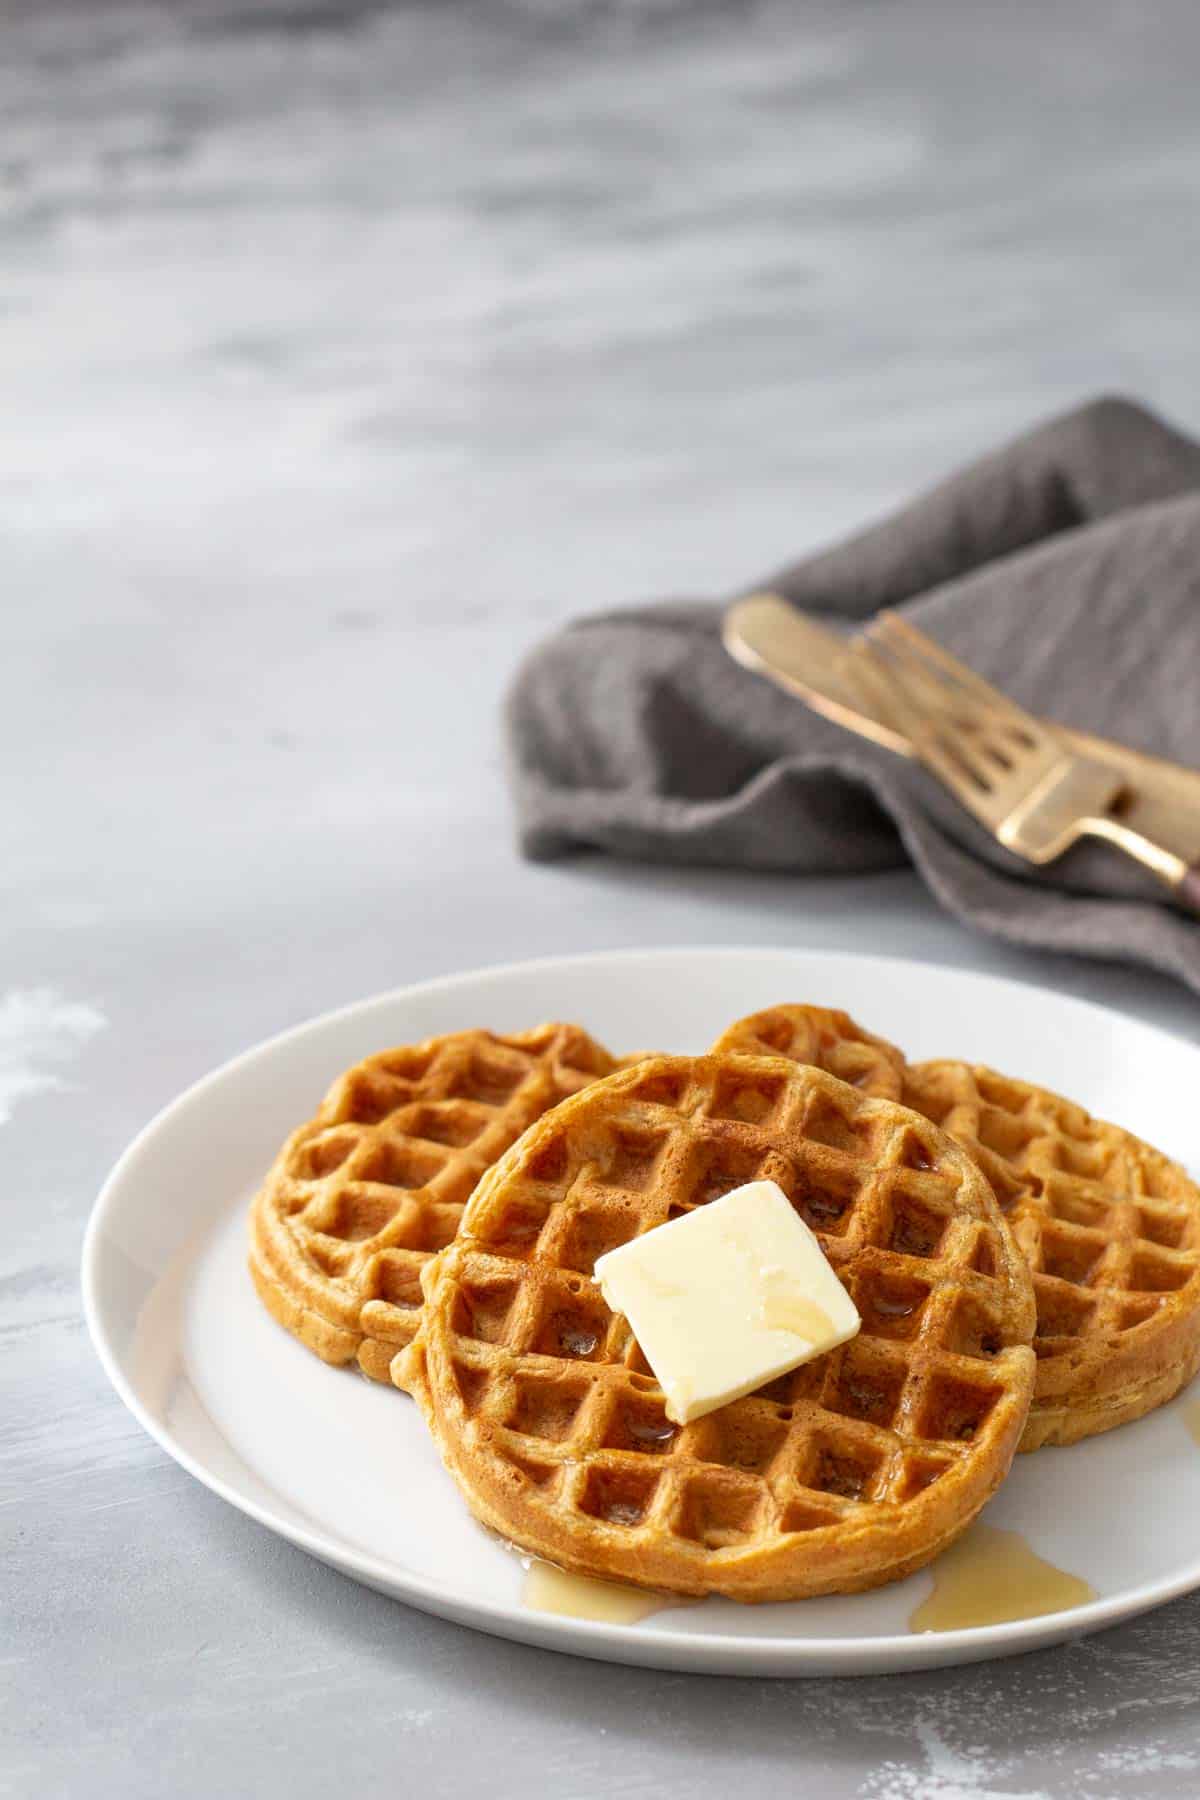 A plate with freshly baked waffles topped with a pat of butter, accompanied by a fork and knife on a napkin.